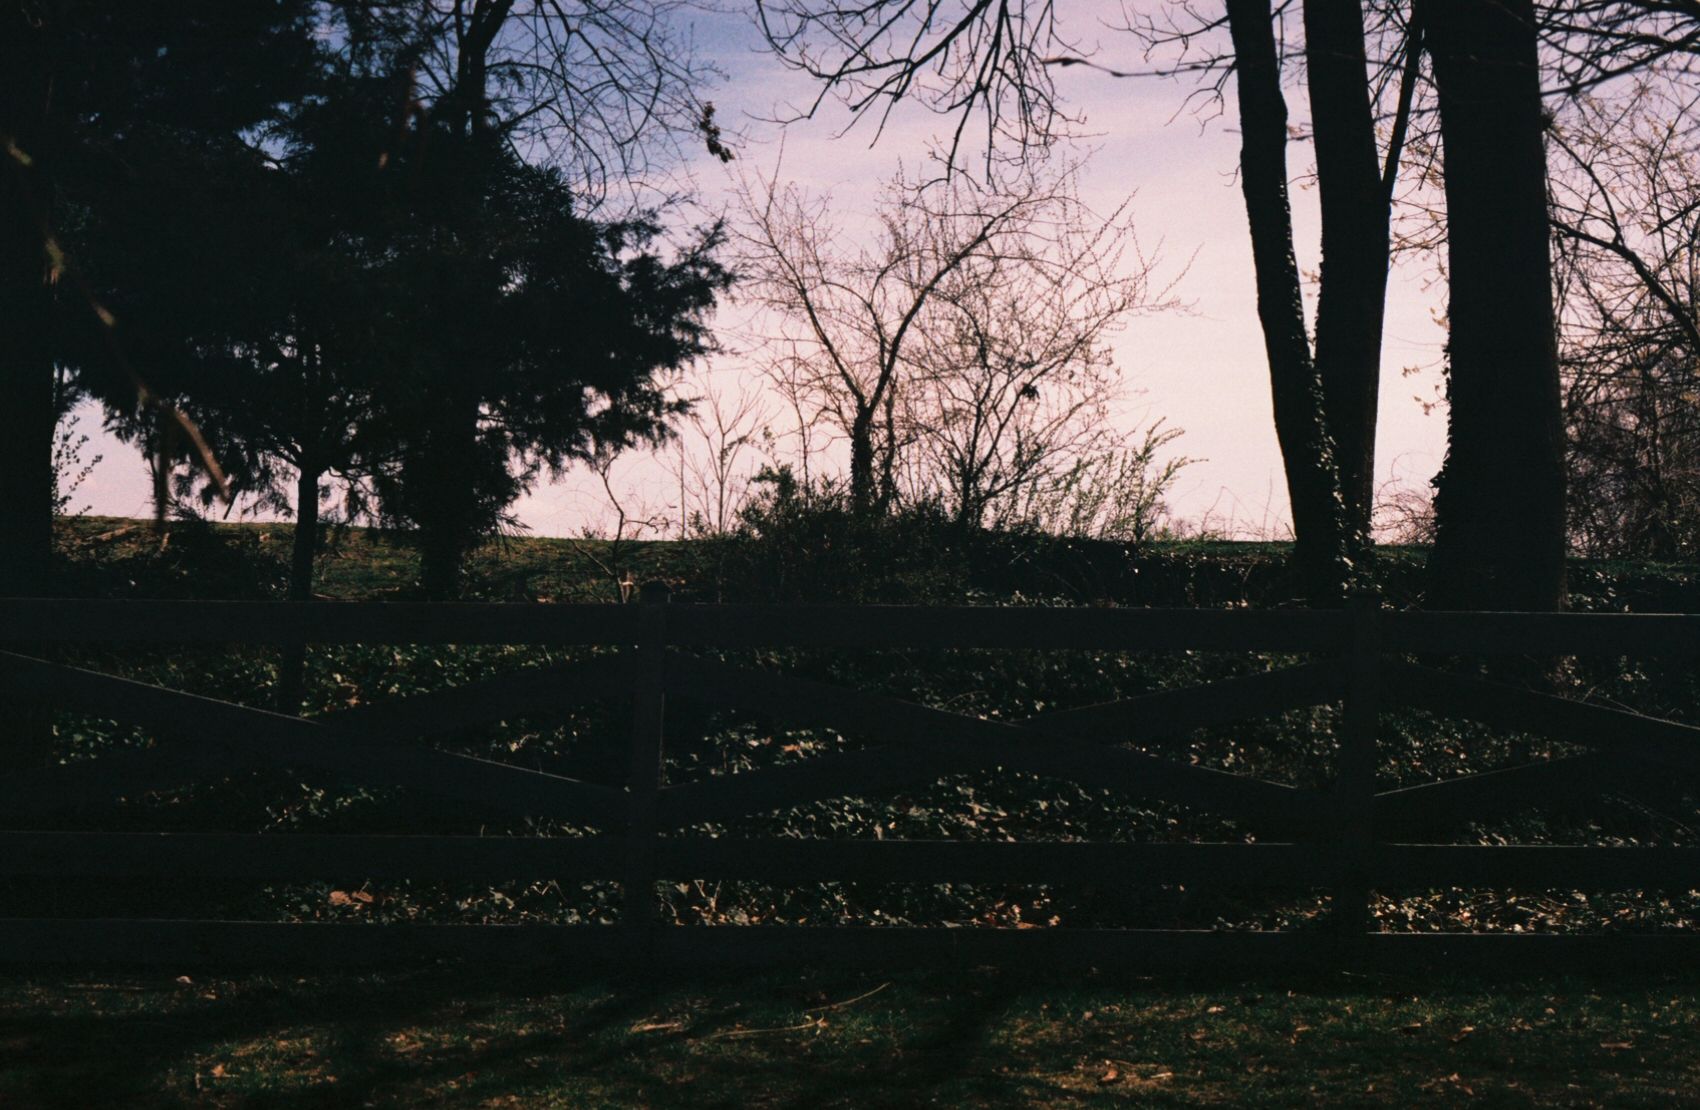 35mm film photograph of a wooden fence. Behind the fence rises a small hill with scraggly trees and bushes.